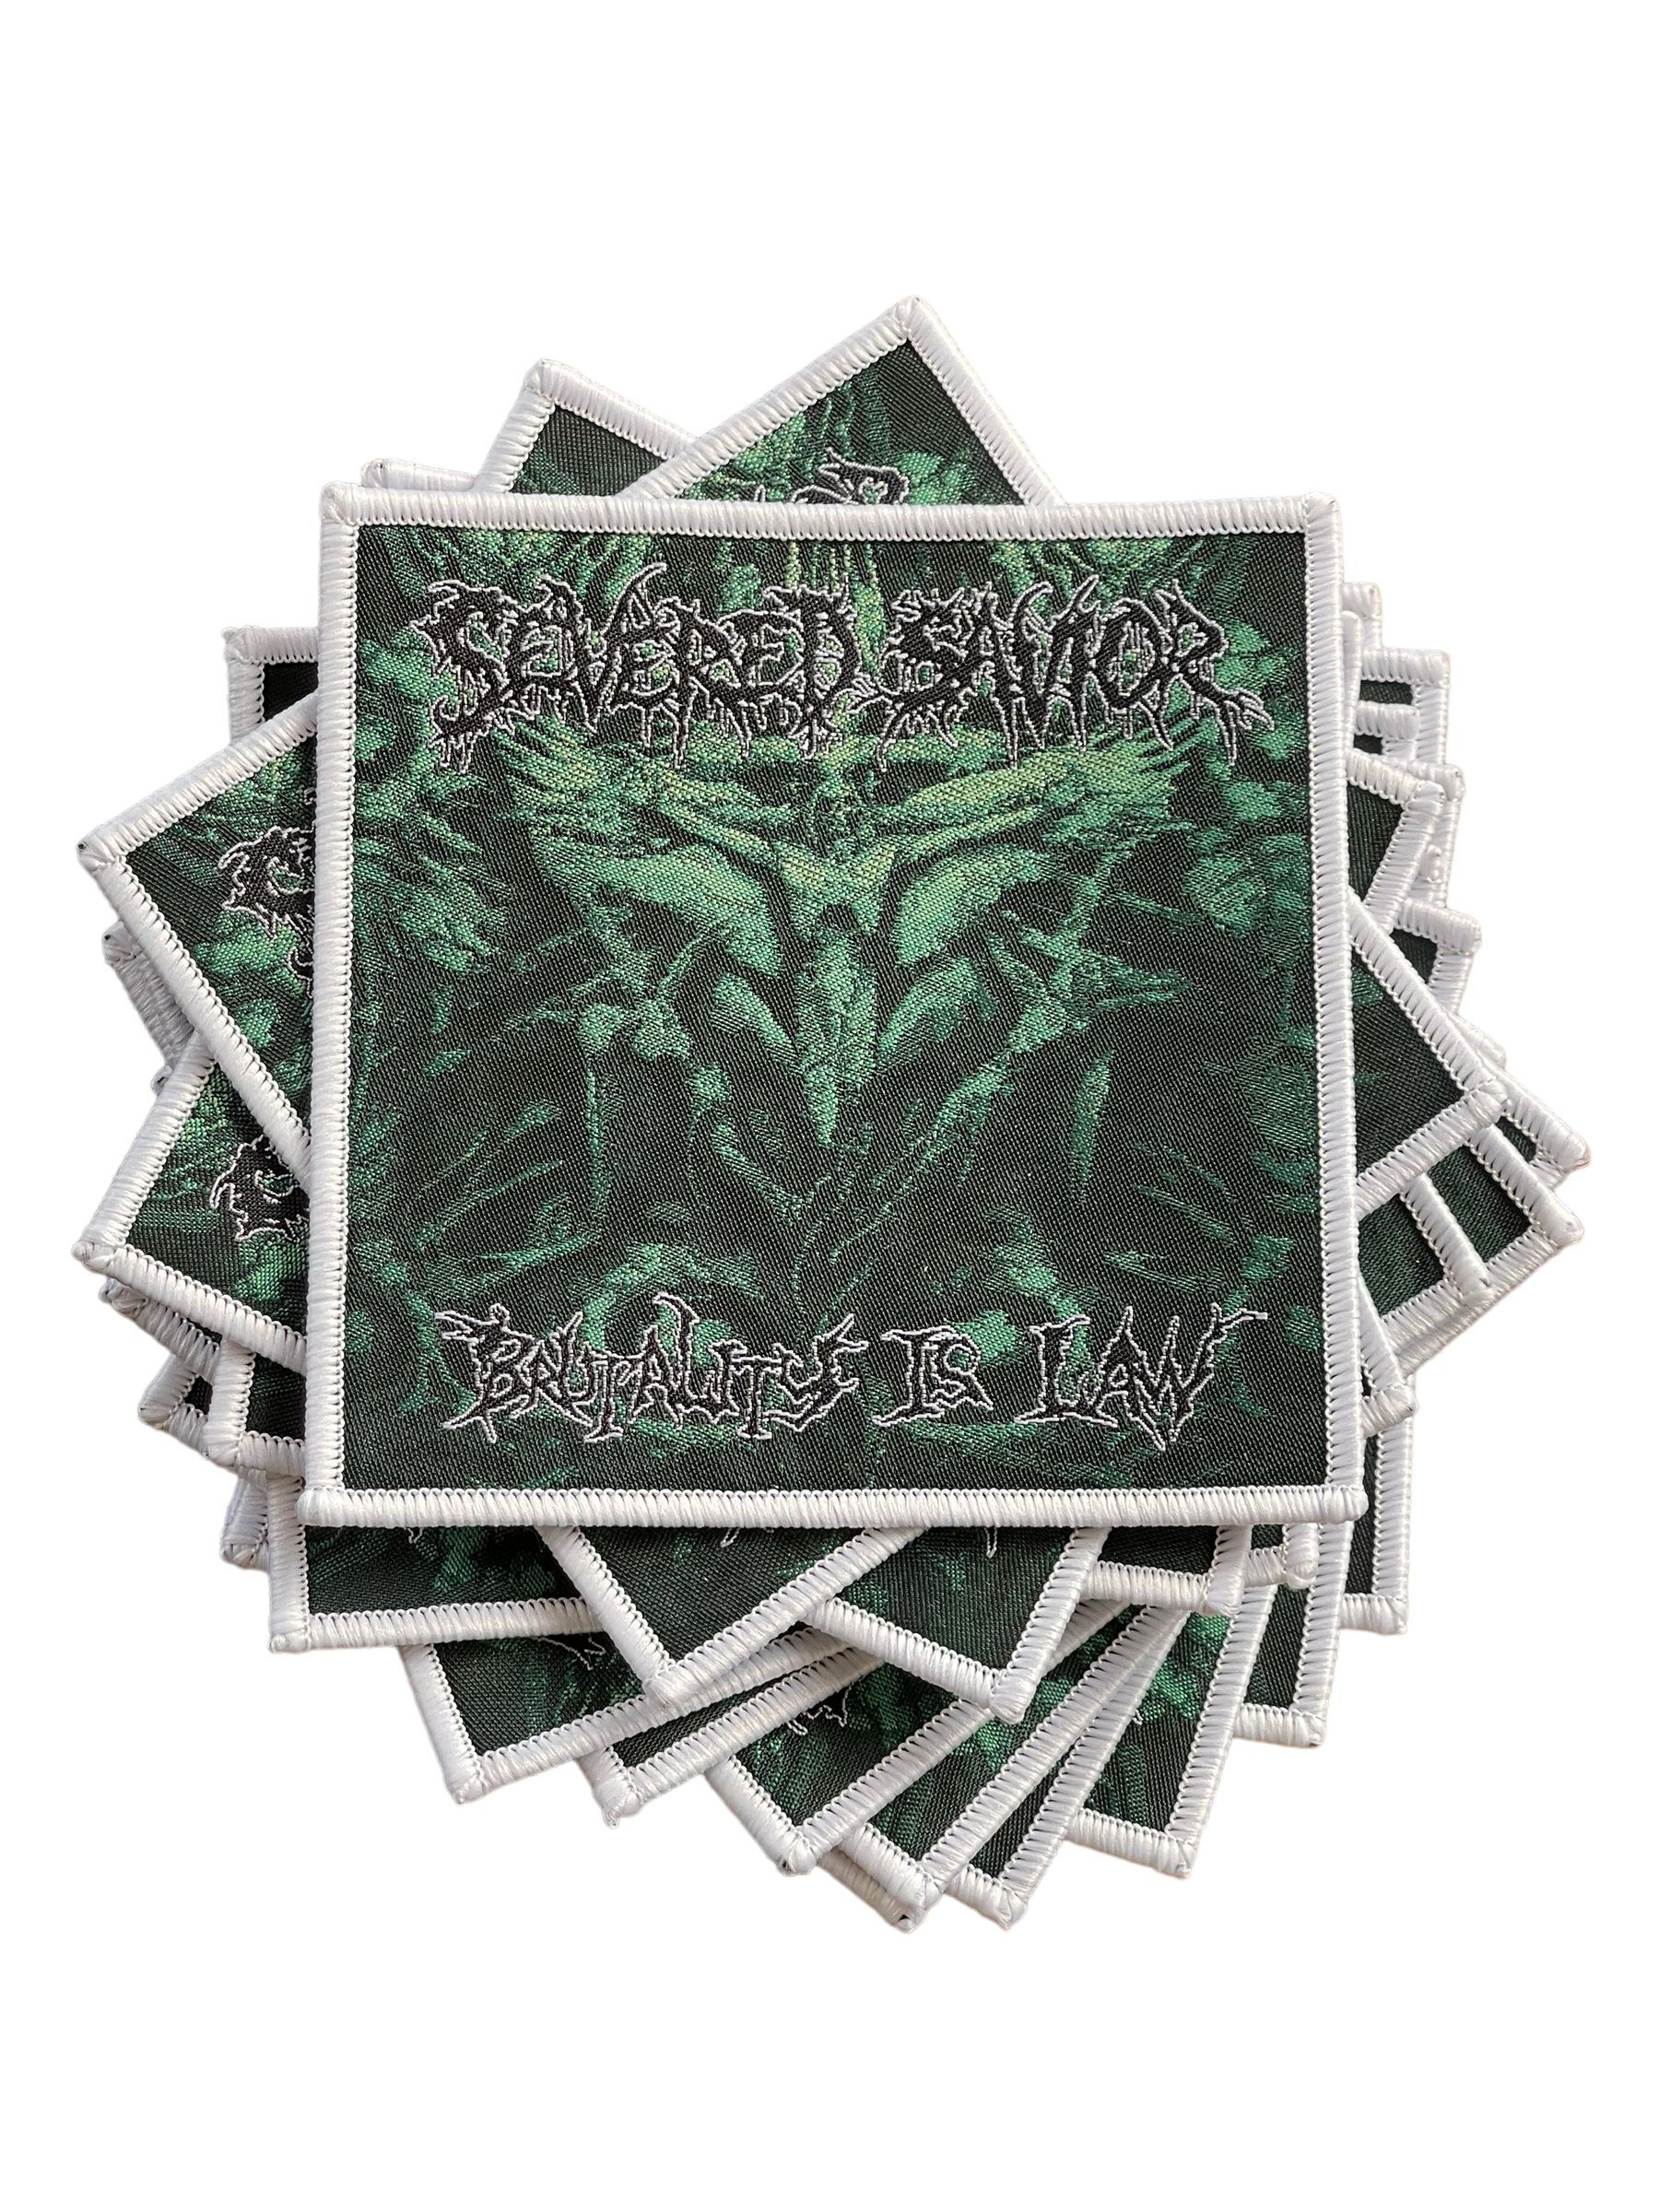 Severed Savior - Square Brutality is Law Patch - White Border